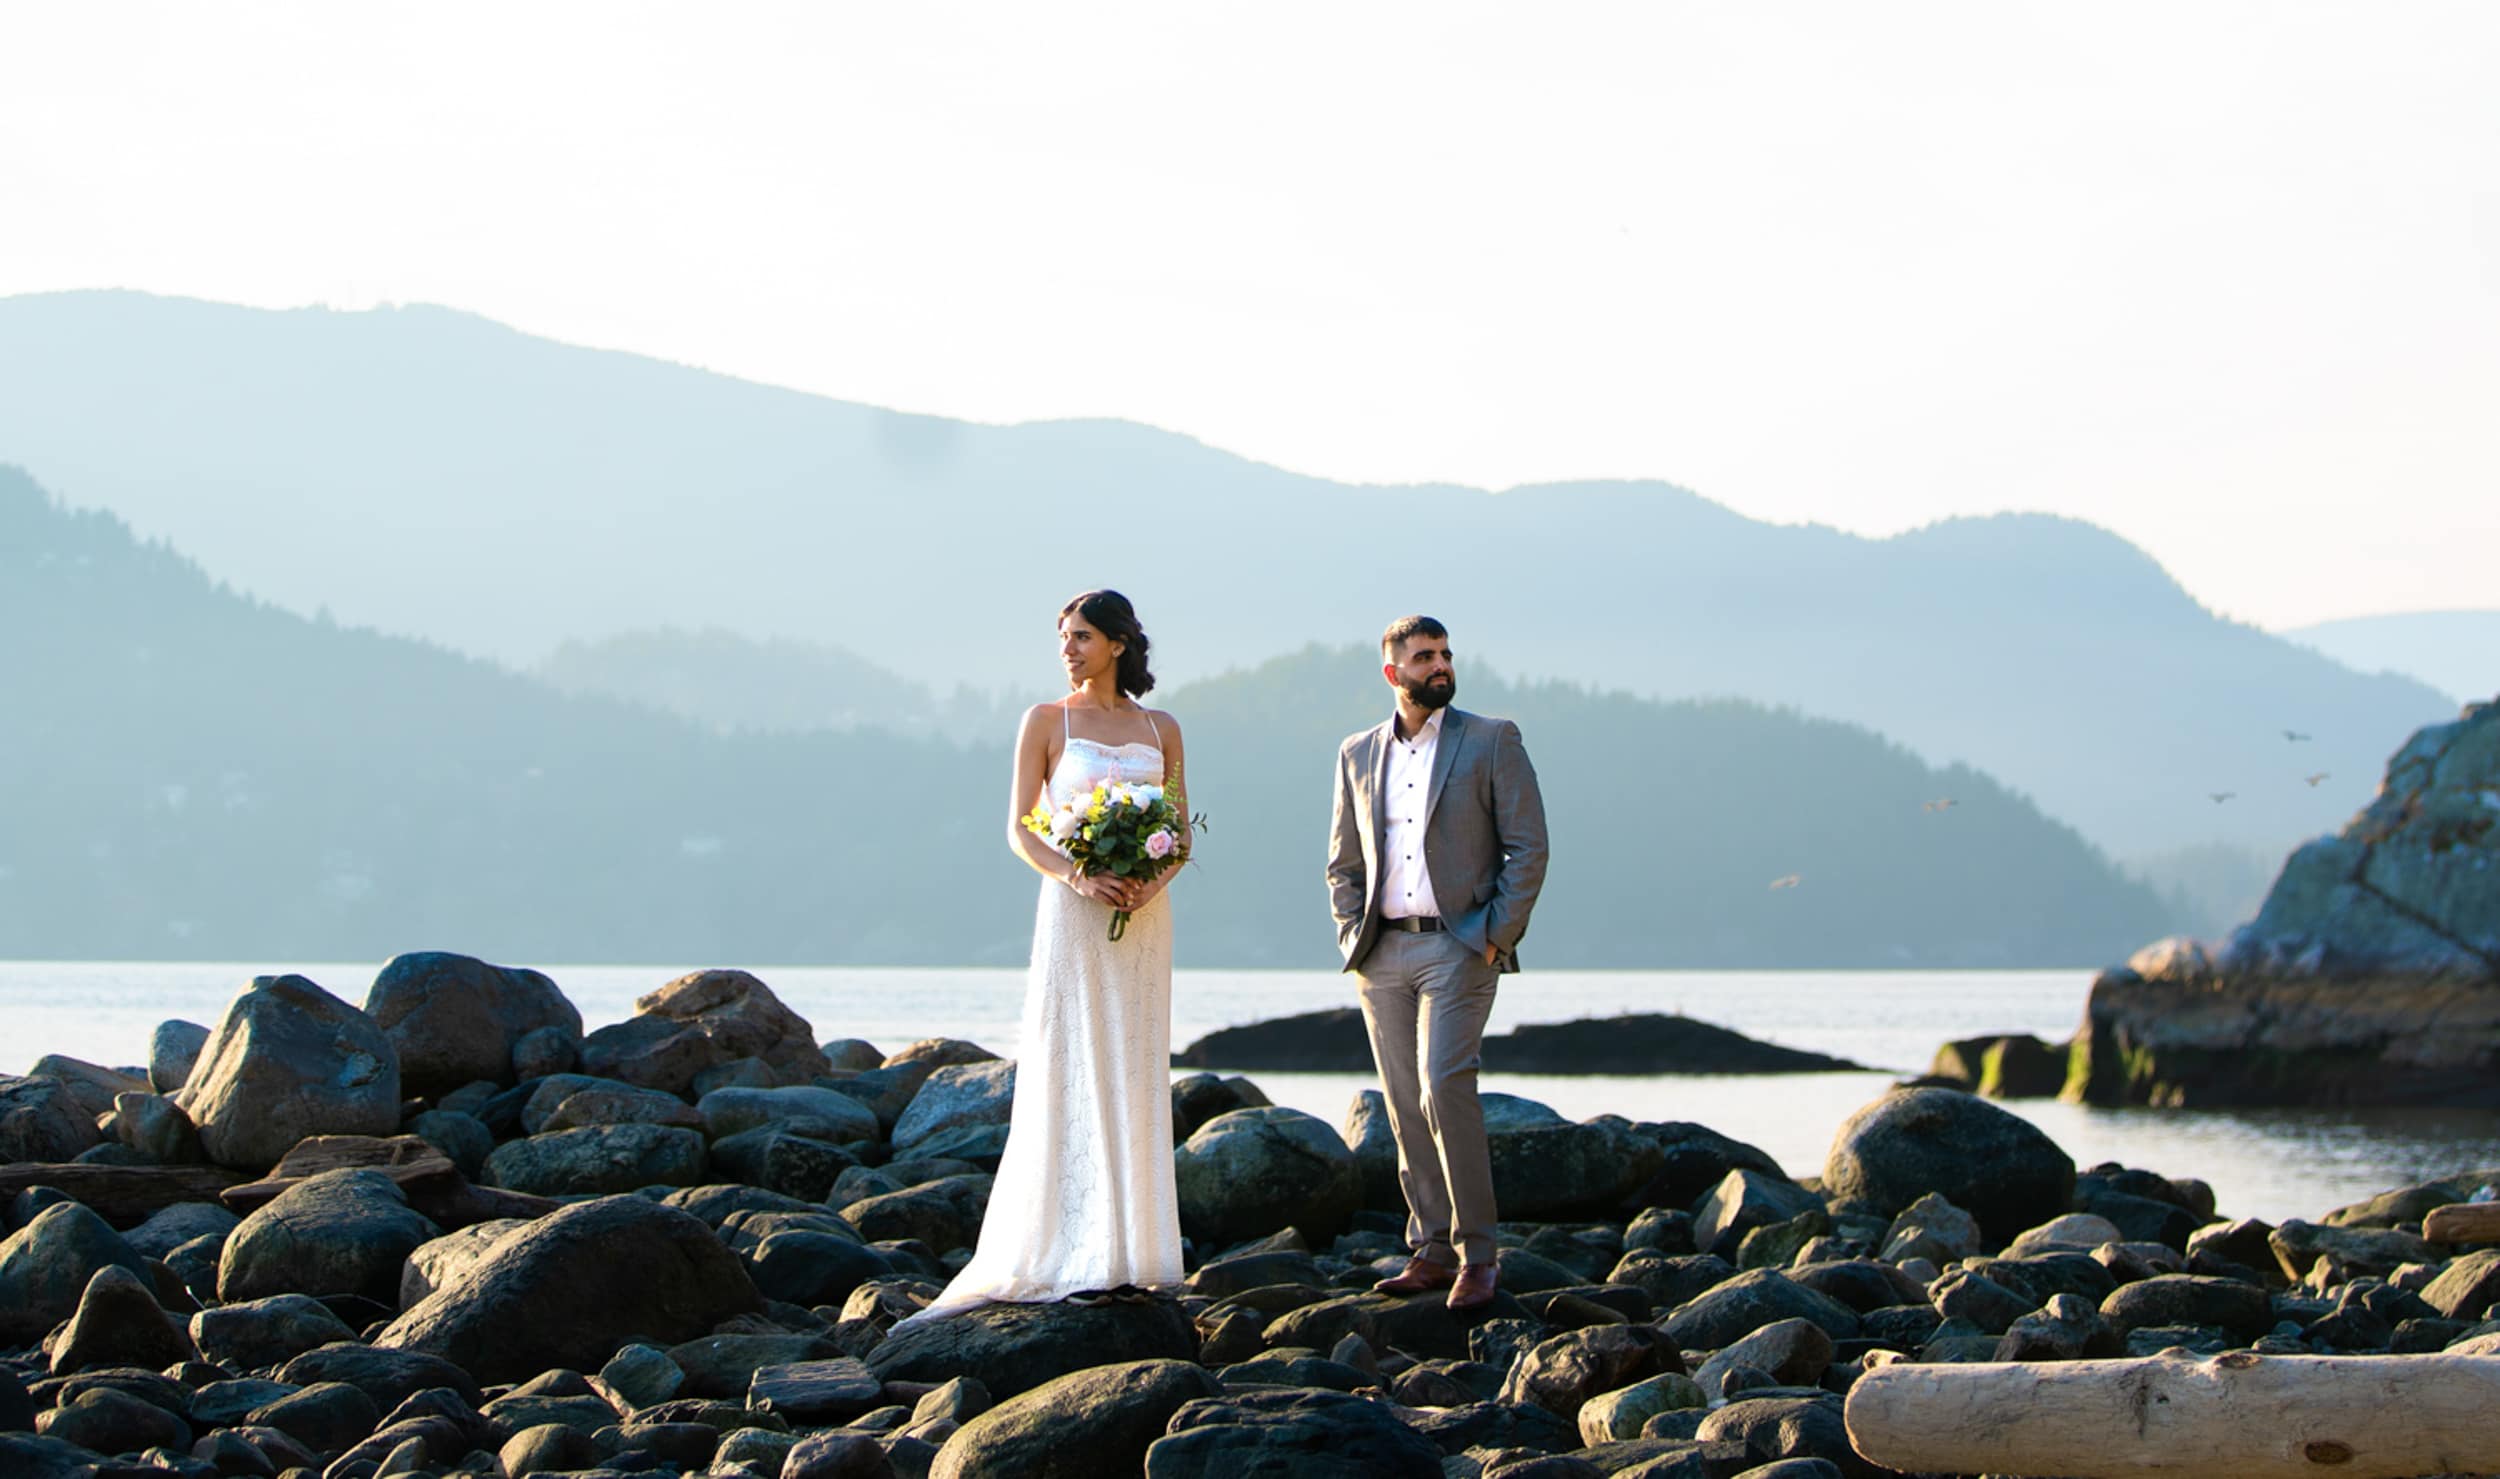 Bride and groom portraits on lake with mountains in background - Vancouver Elopement Photography